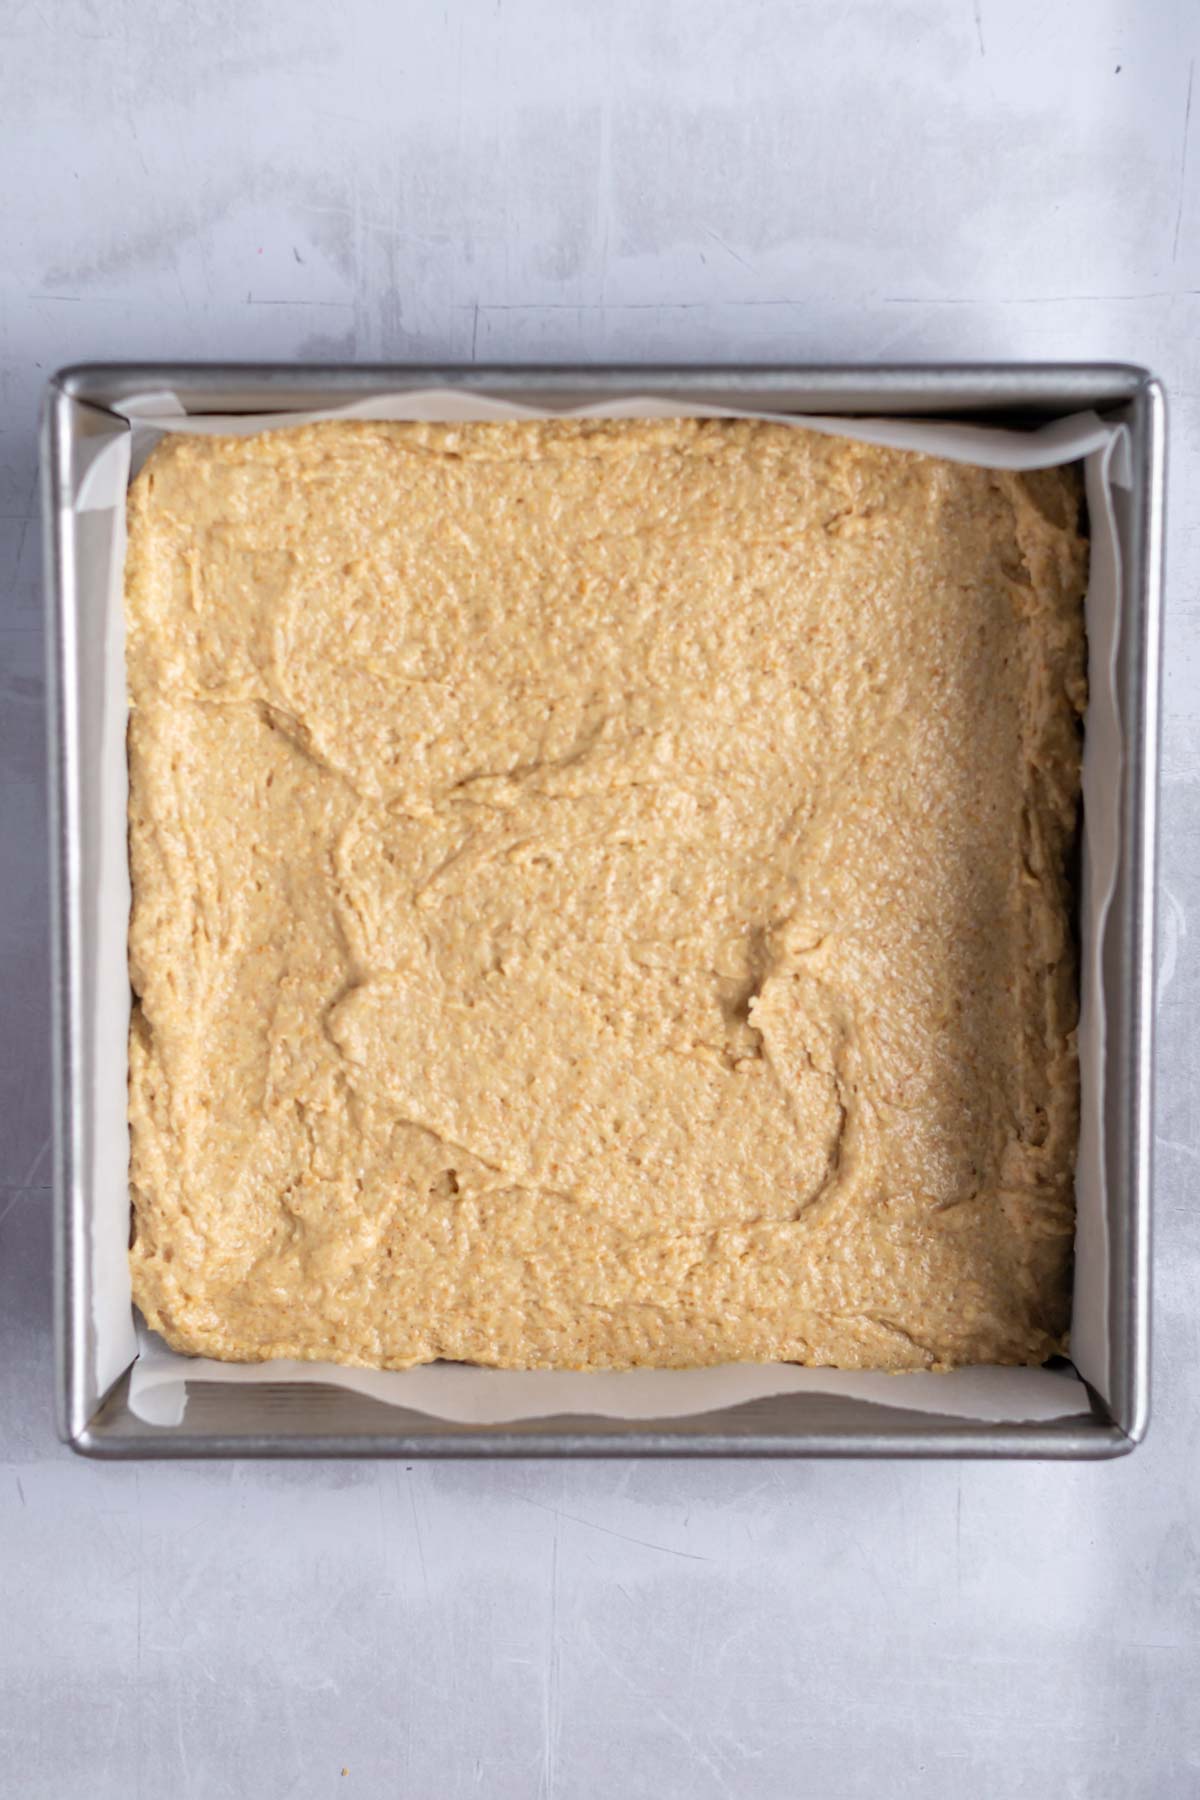 cake batter in a parchment lined baking tin